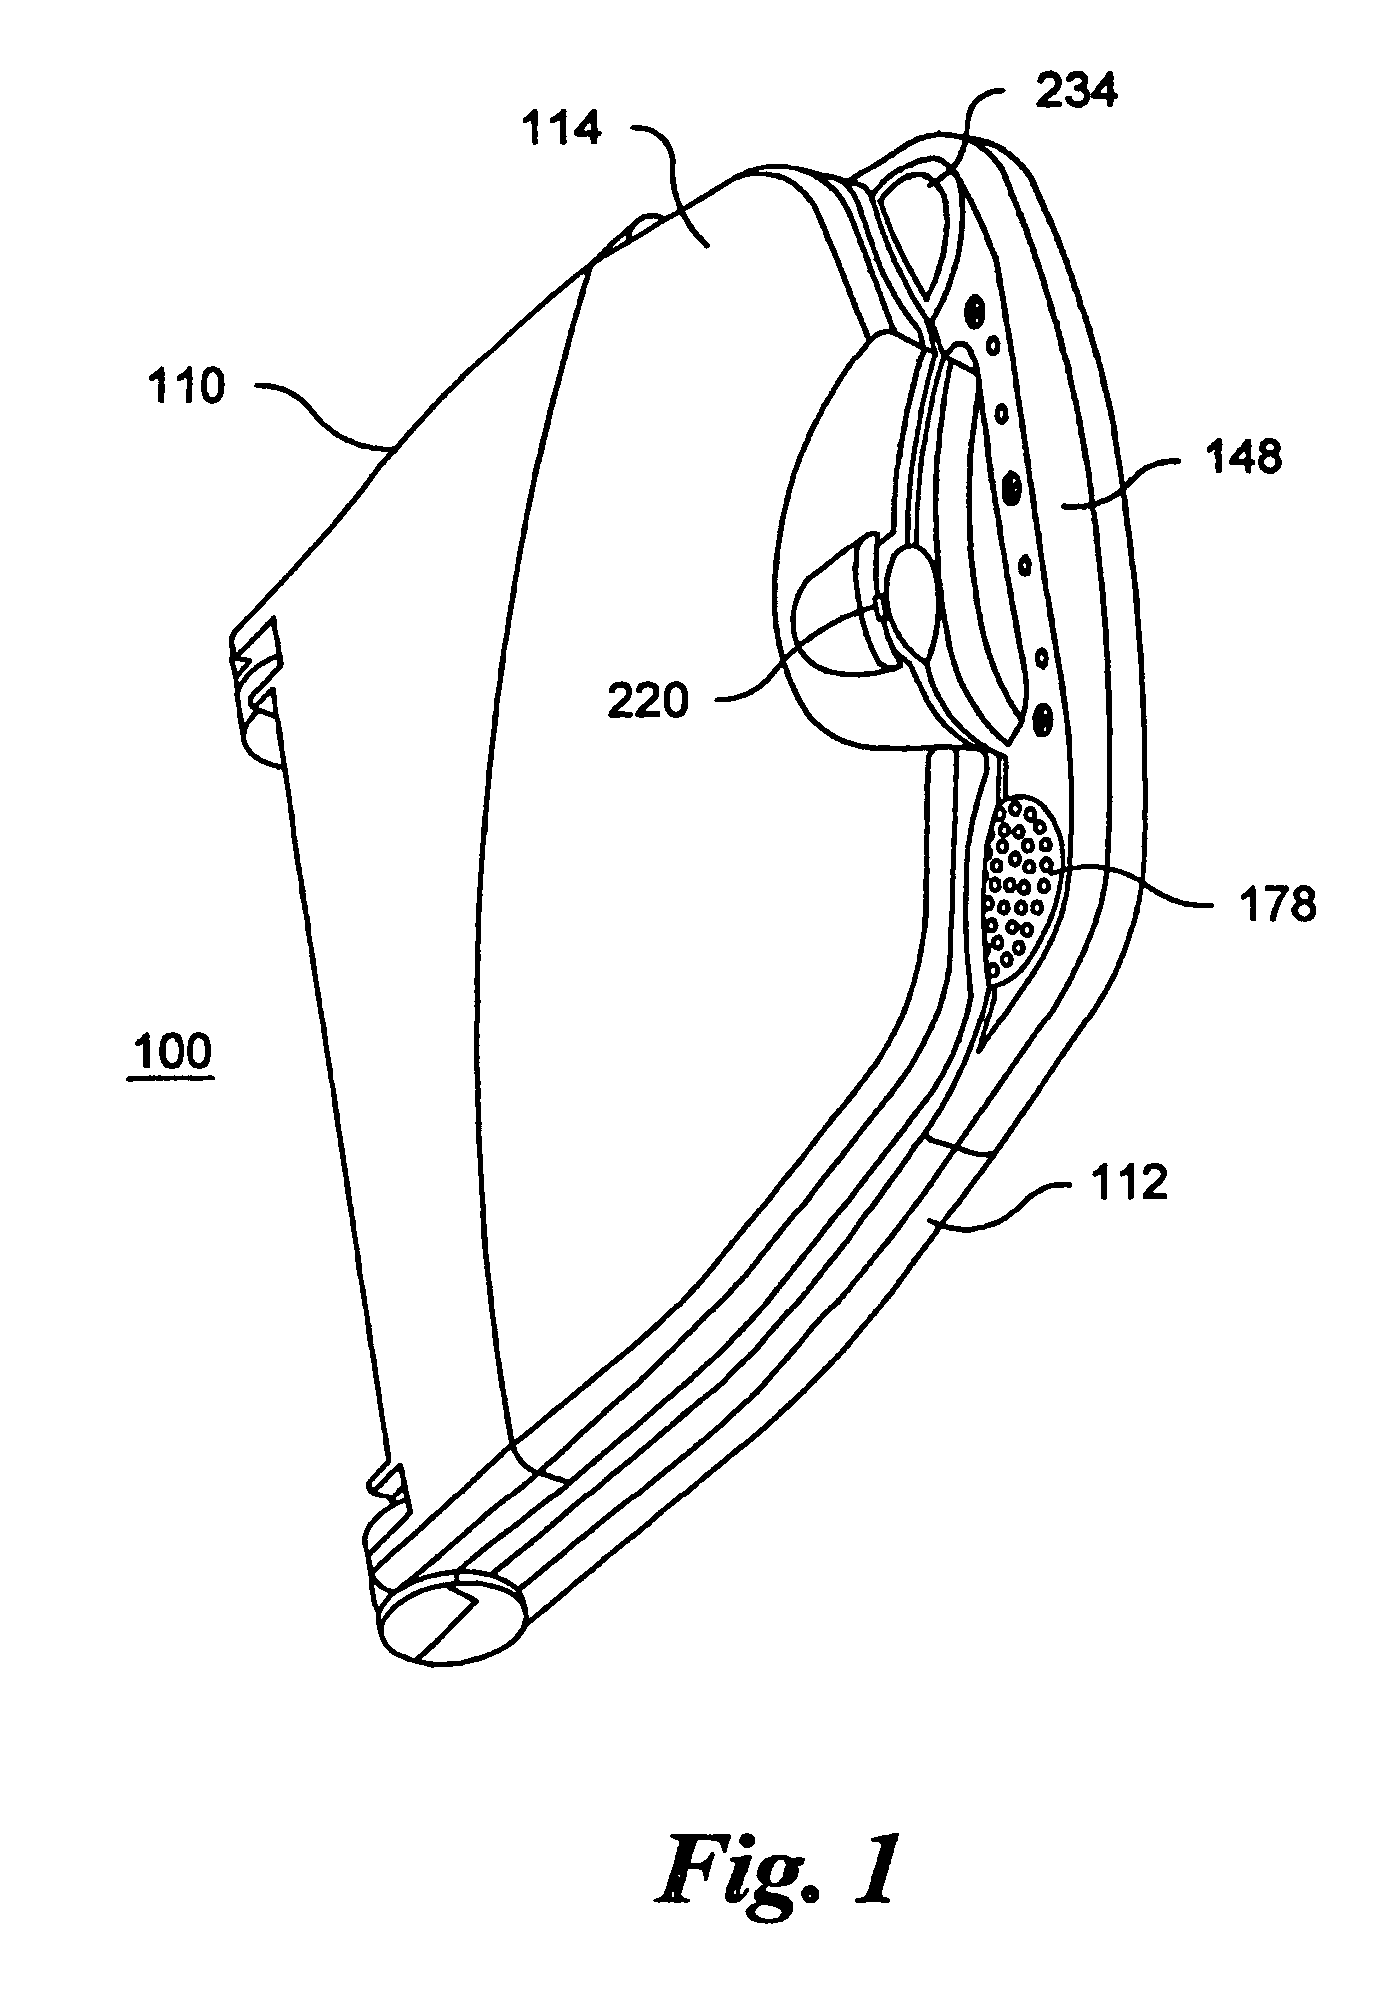 Interactive multi-sensory reading system electronic teaching/learning device